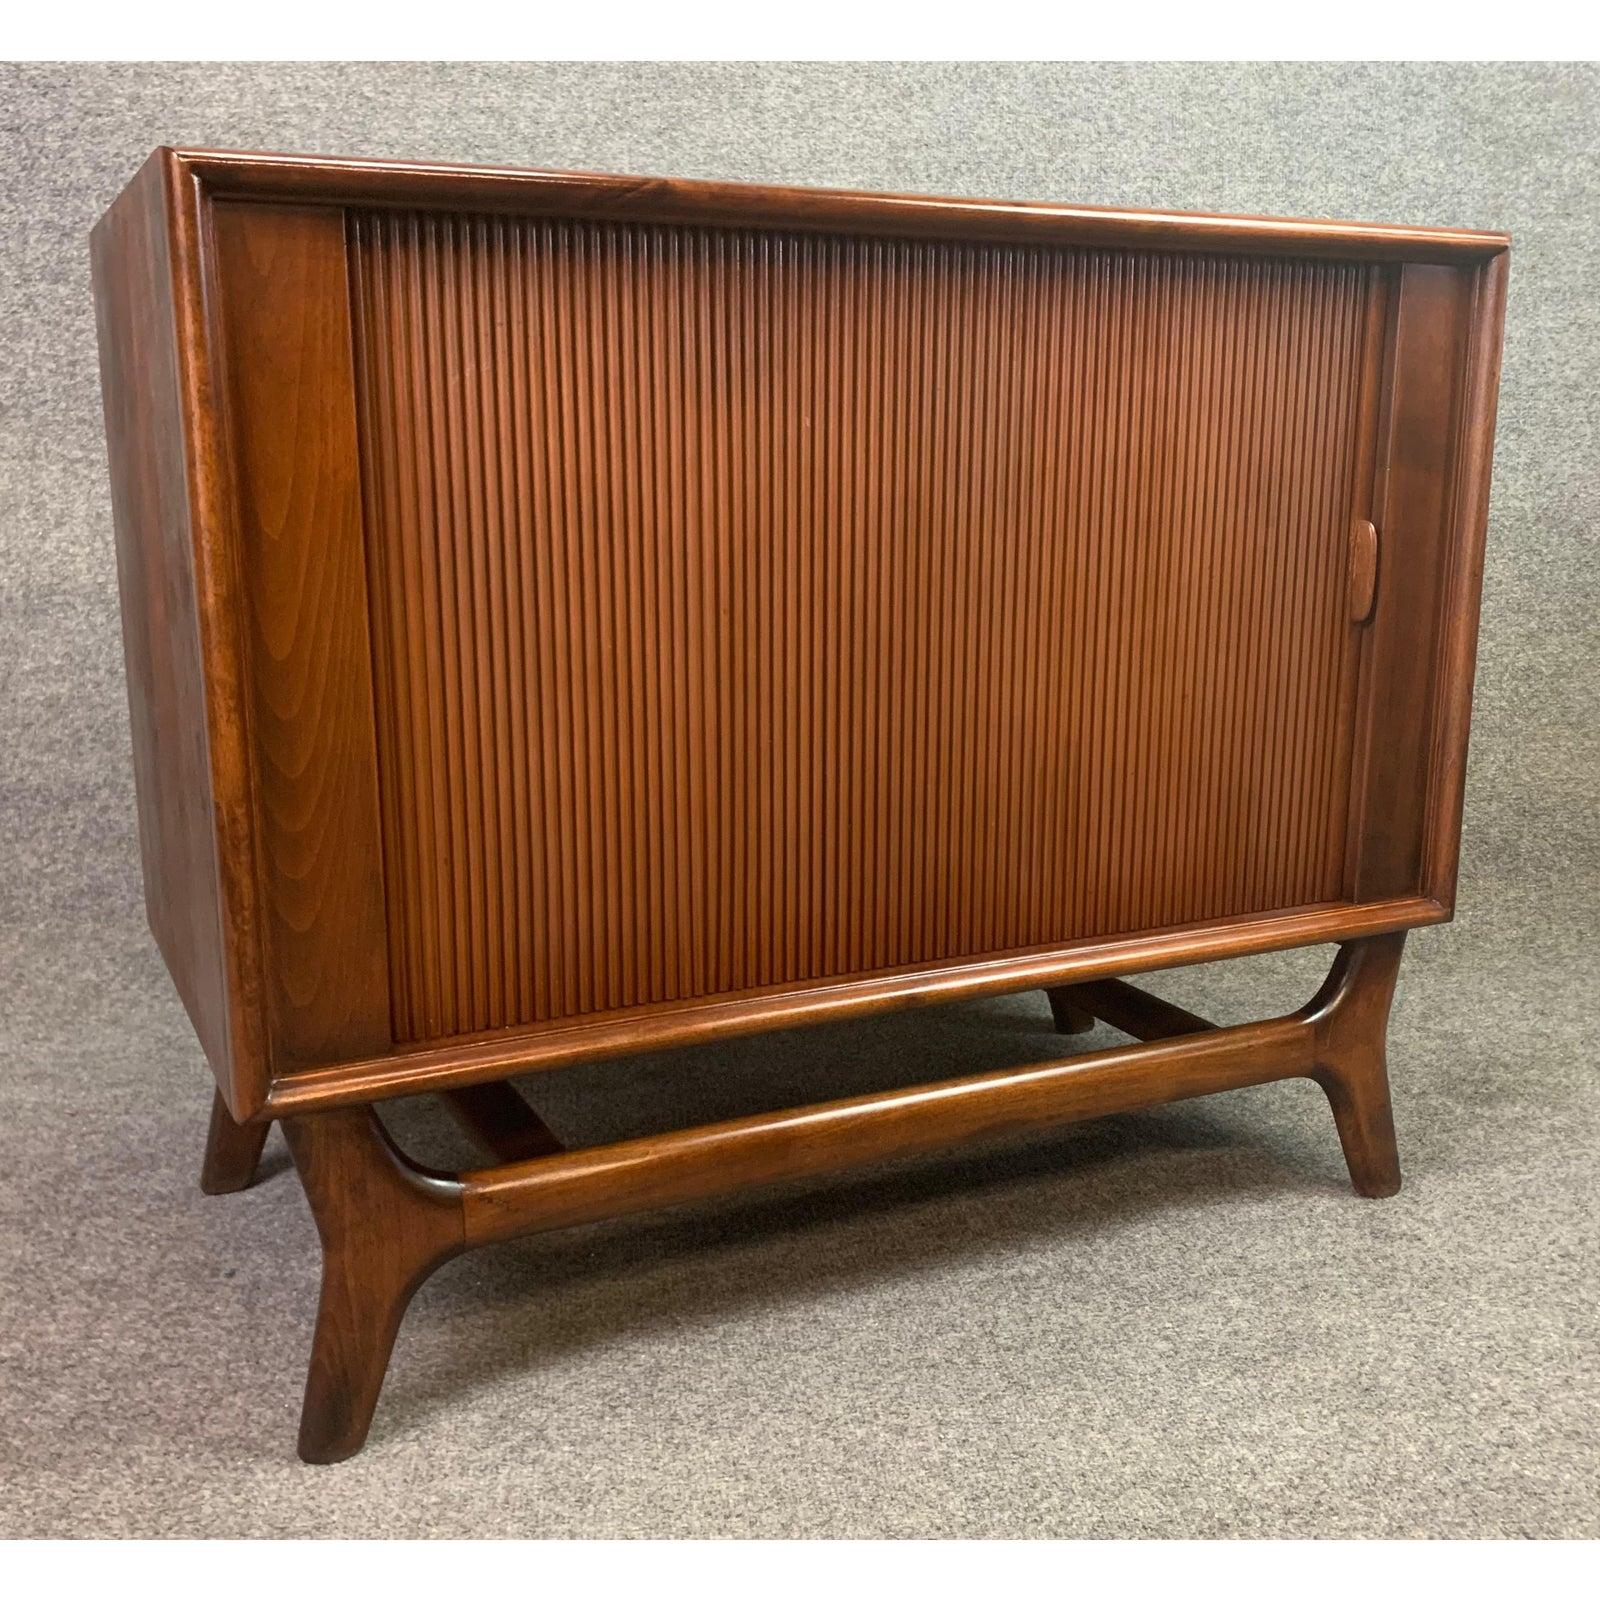 Here is a beautiful TV cabinet in walnut manufactured in the US in the 1960s by Packard Bell.
This fully refinished cabinet has been gutted of its TV and components and up cycled with record dividers. The tambour door rolls smoothly.
Excellent